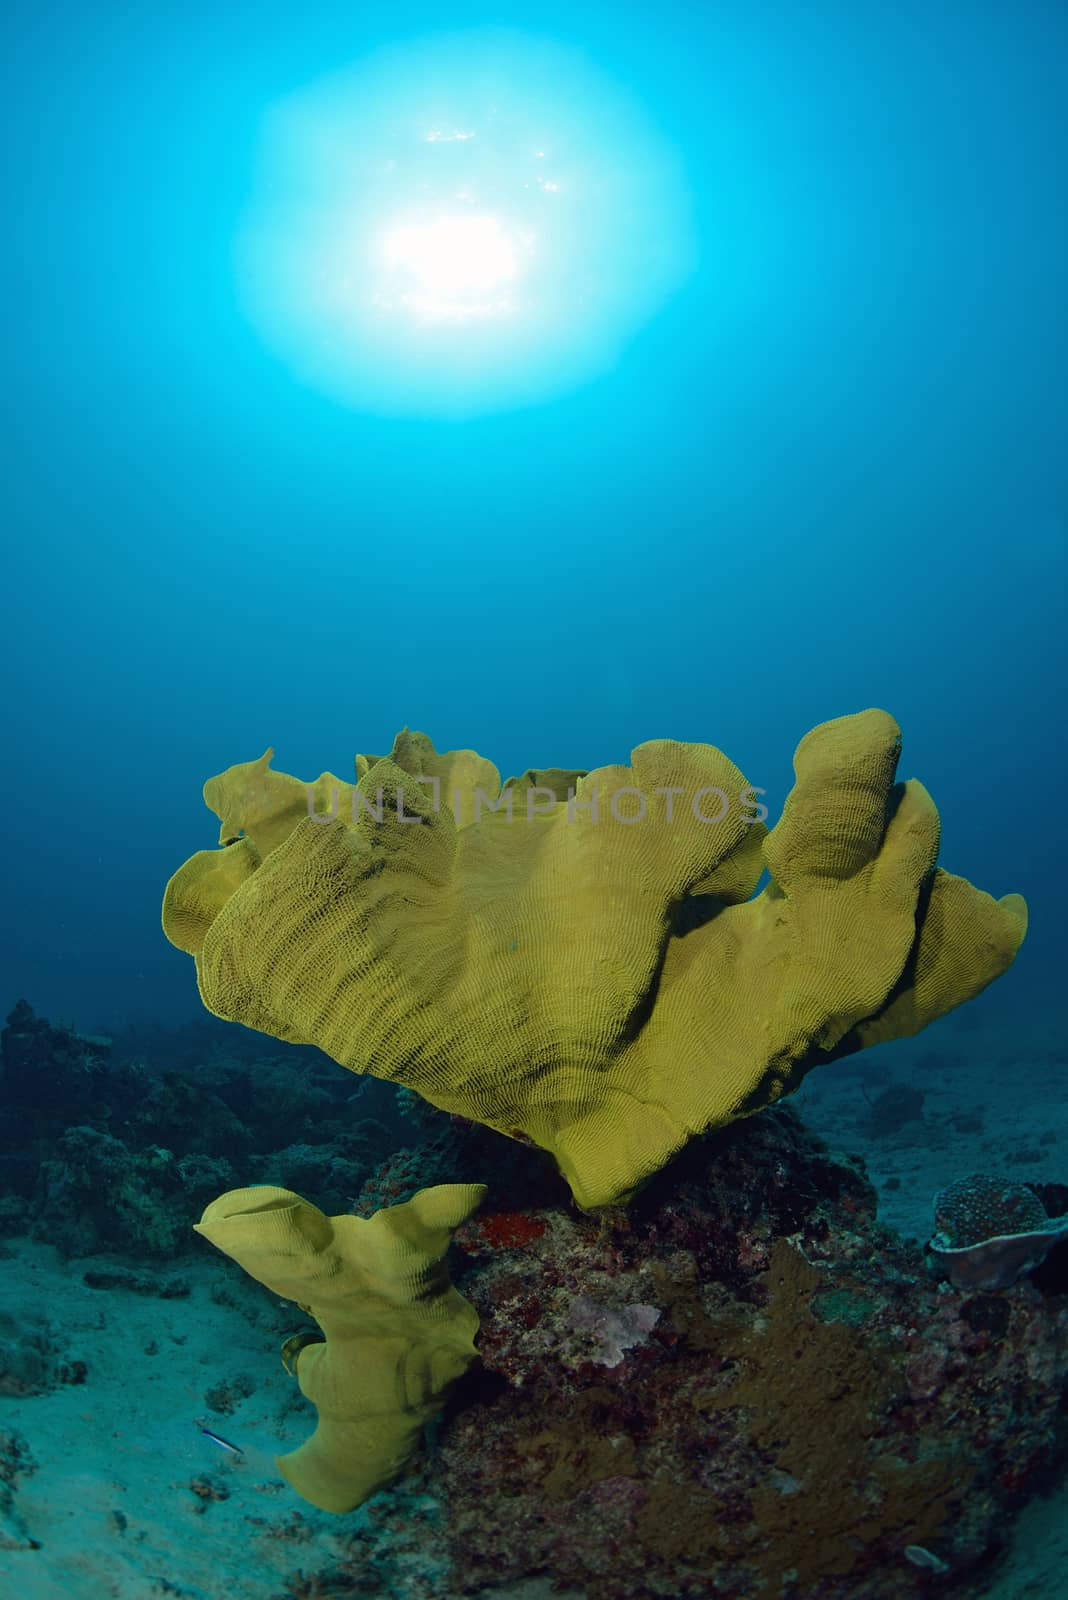 bright coral underwater in Sipadan, Malaysia by think4photop